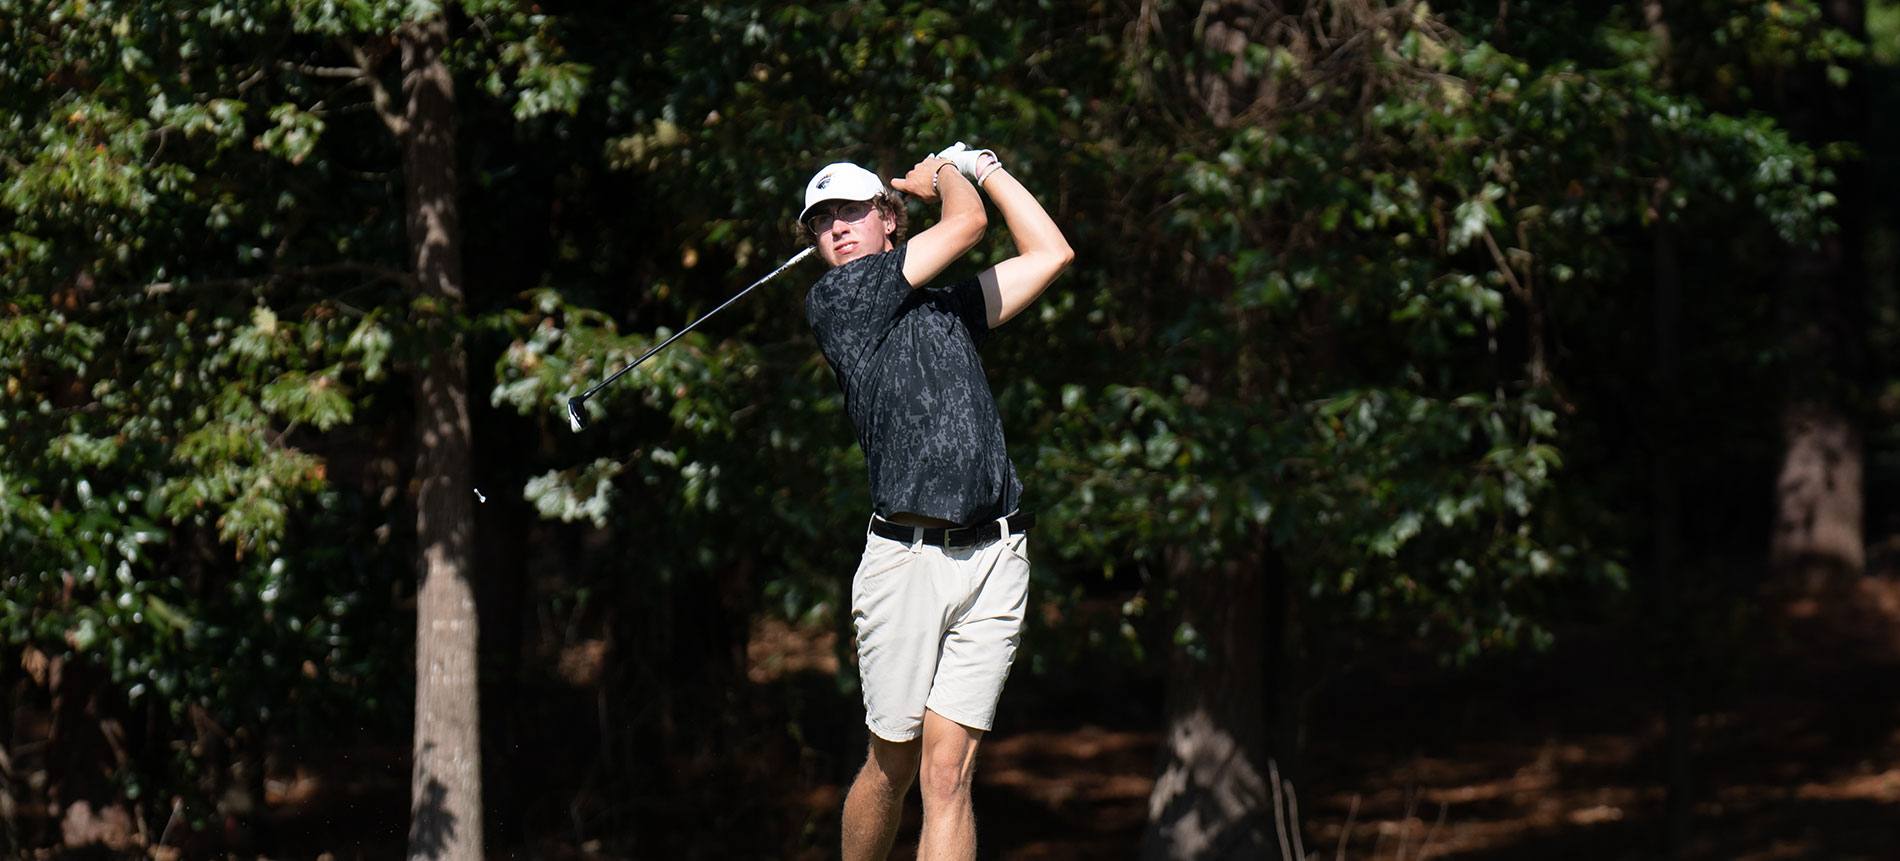 Men’s Golf in Eighth Place after Day One of Spring Bulldog Clash